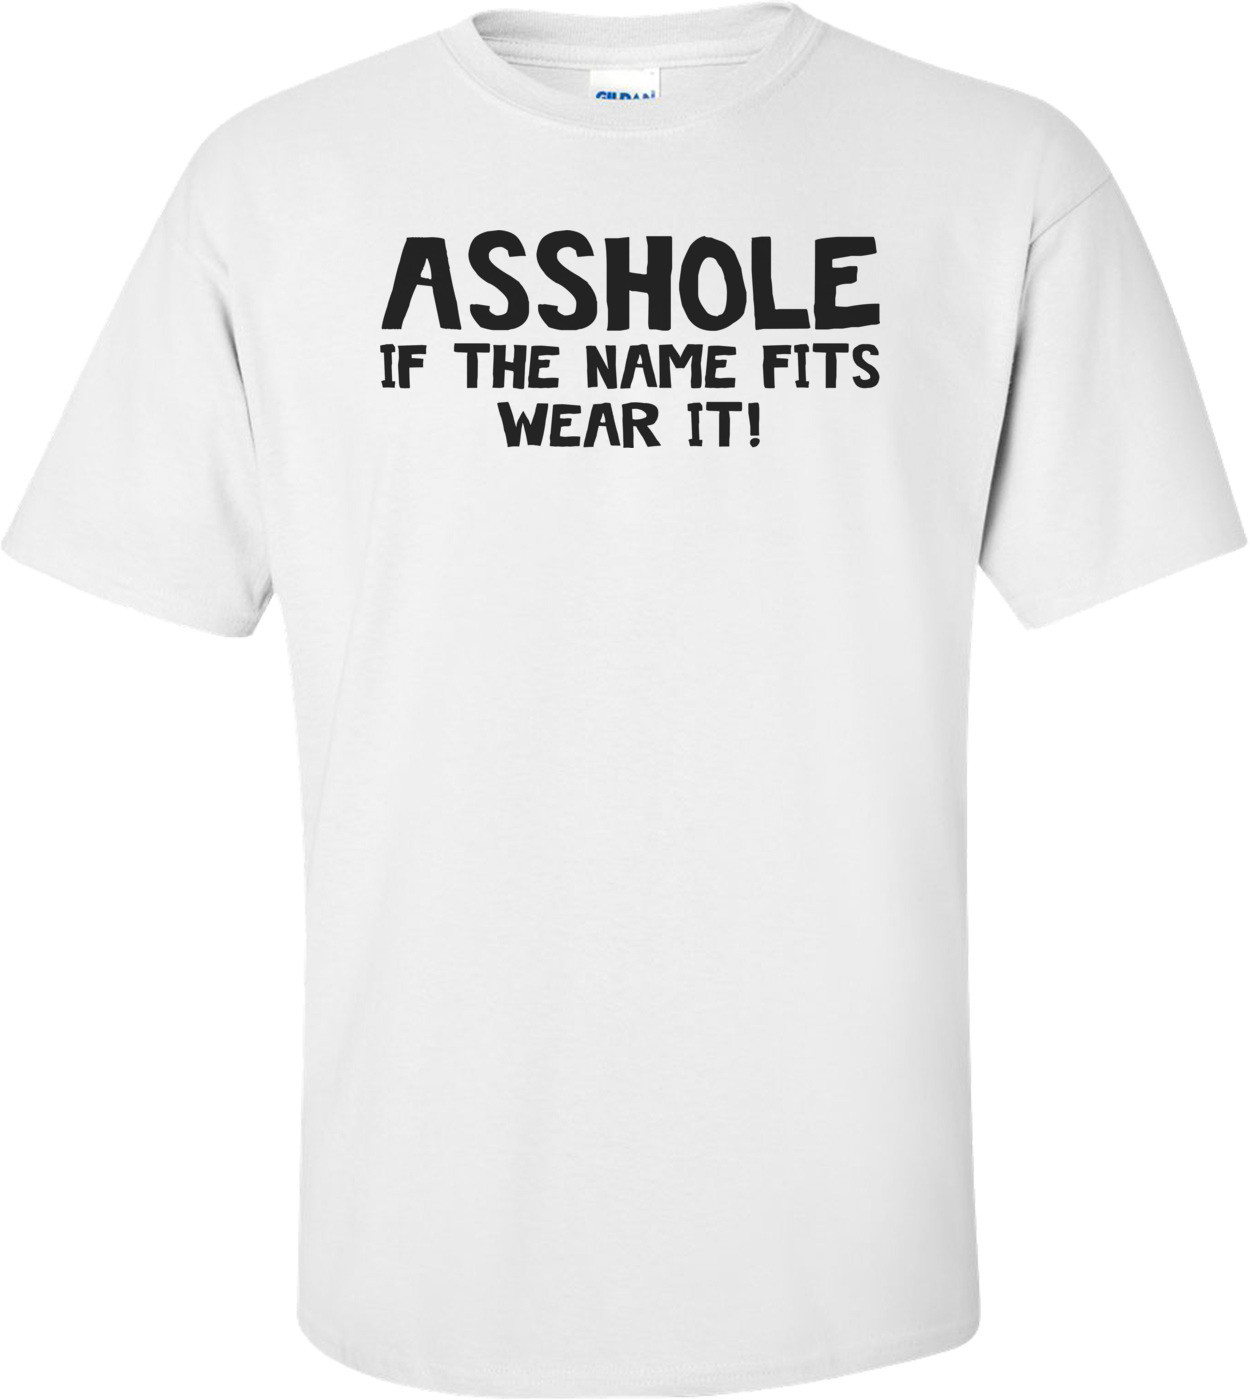 Asshole If The Name Fits Wear It! - Funny Shirt